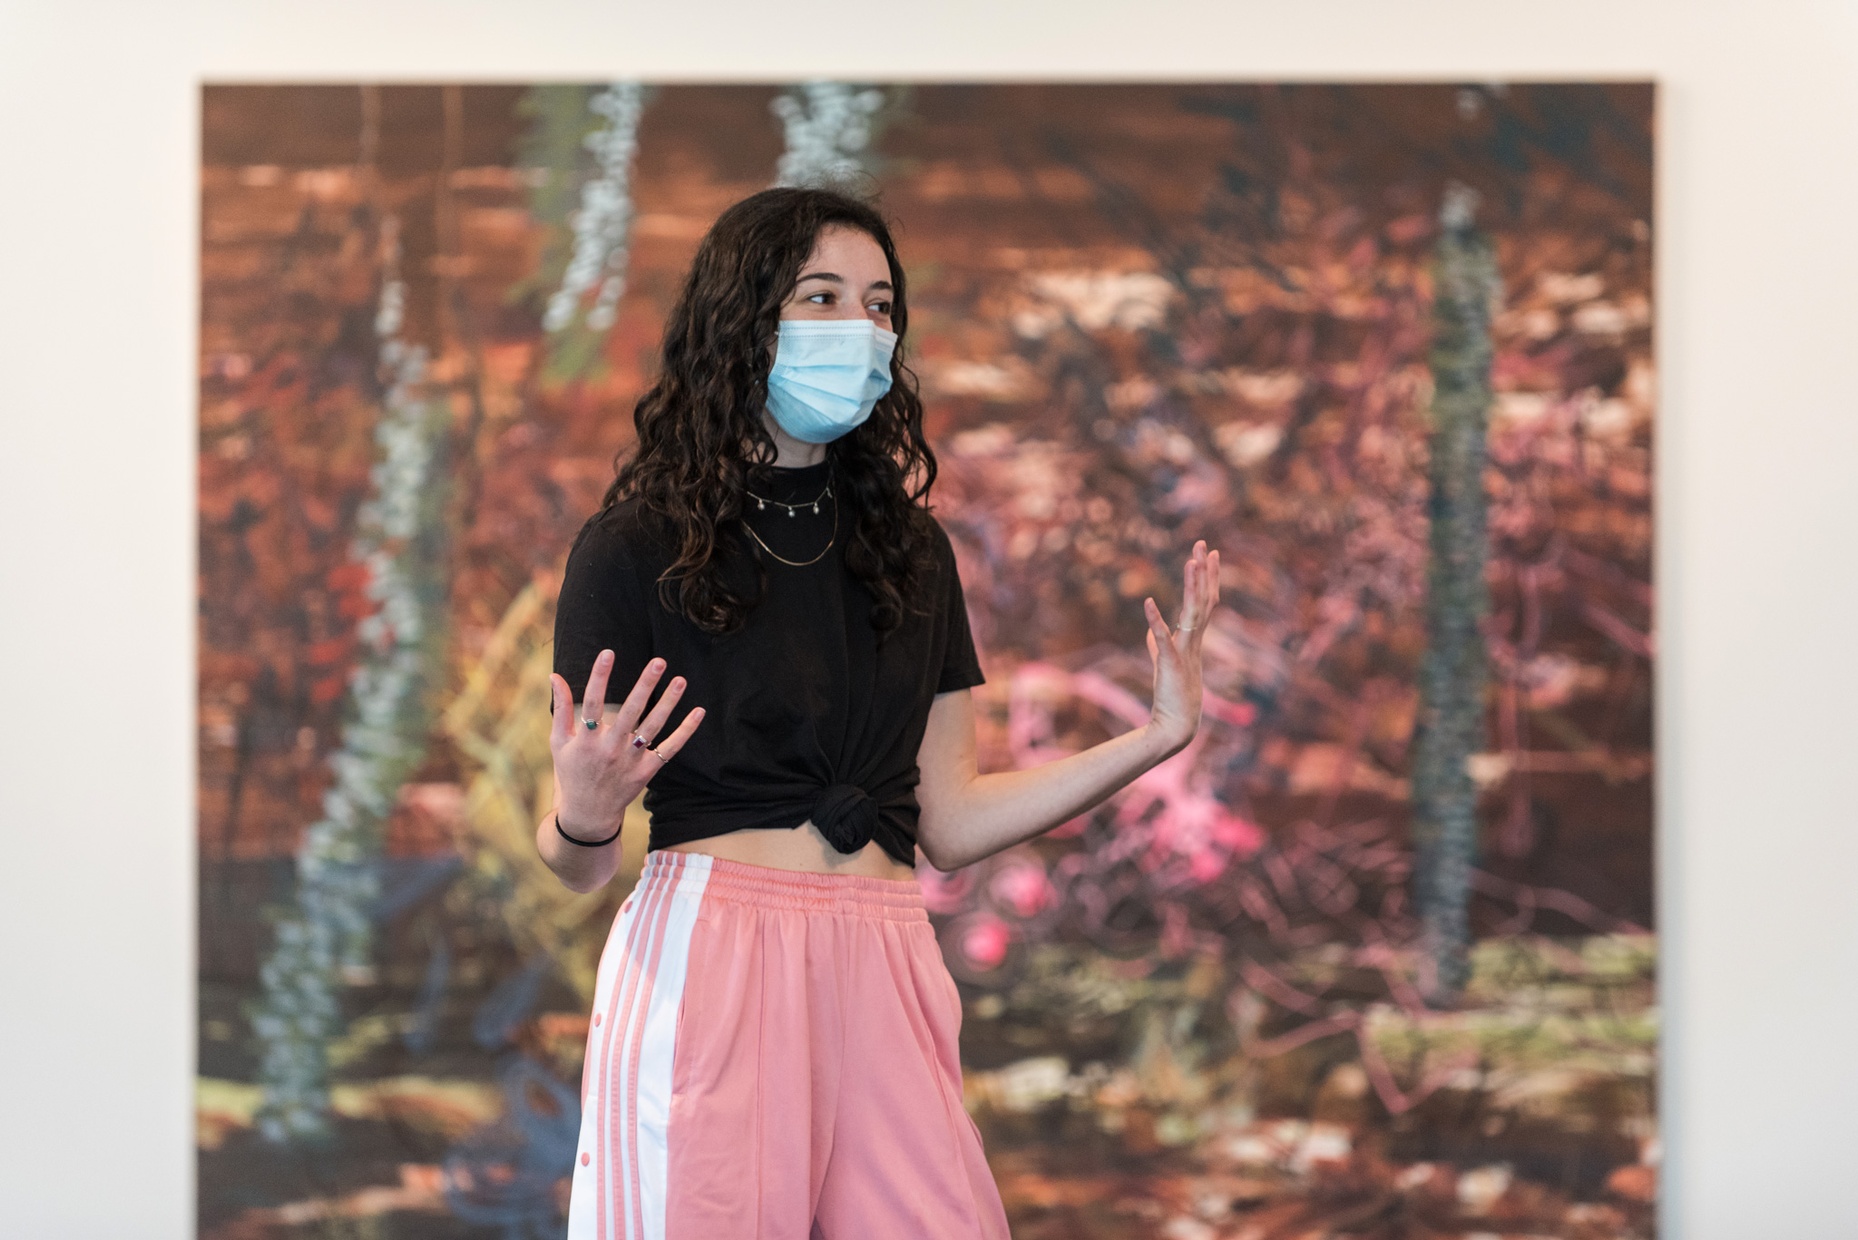 A young woman wearing a mask, a black shirt, and pink pants, stands in front of an abstract painting while speaking and gesturing with her hands.